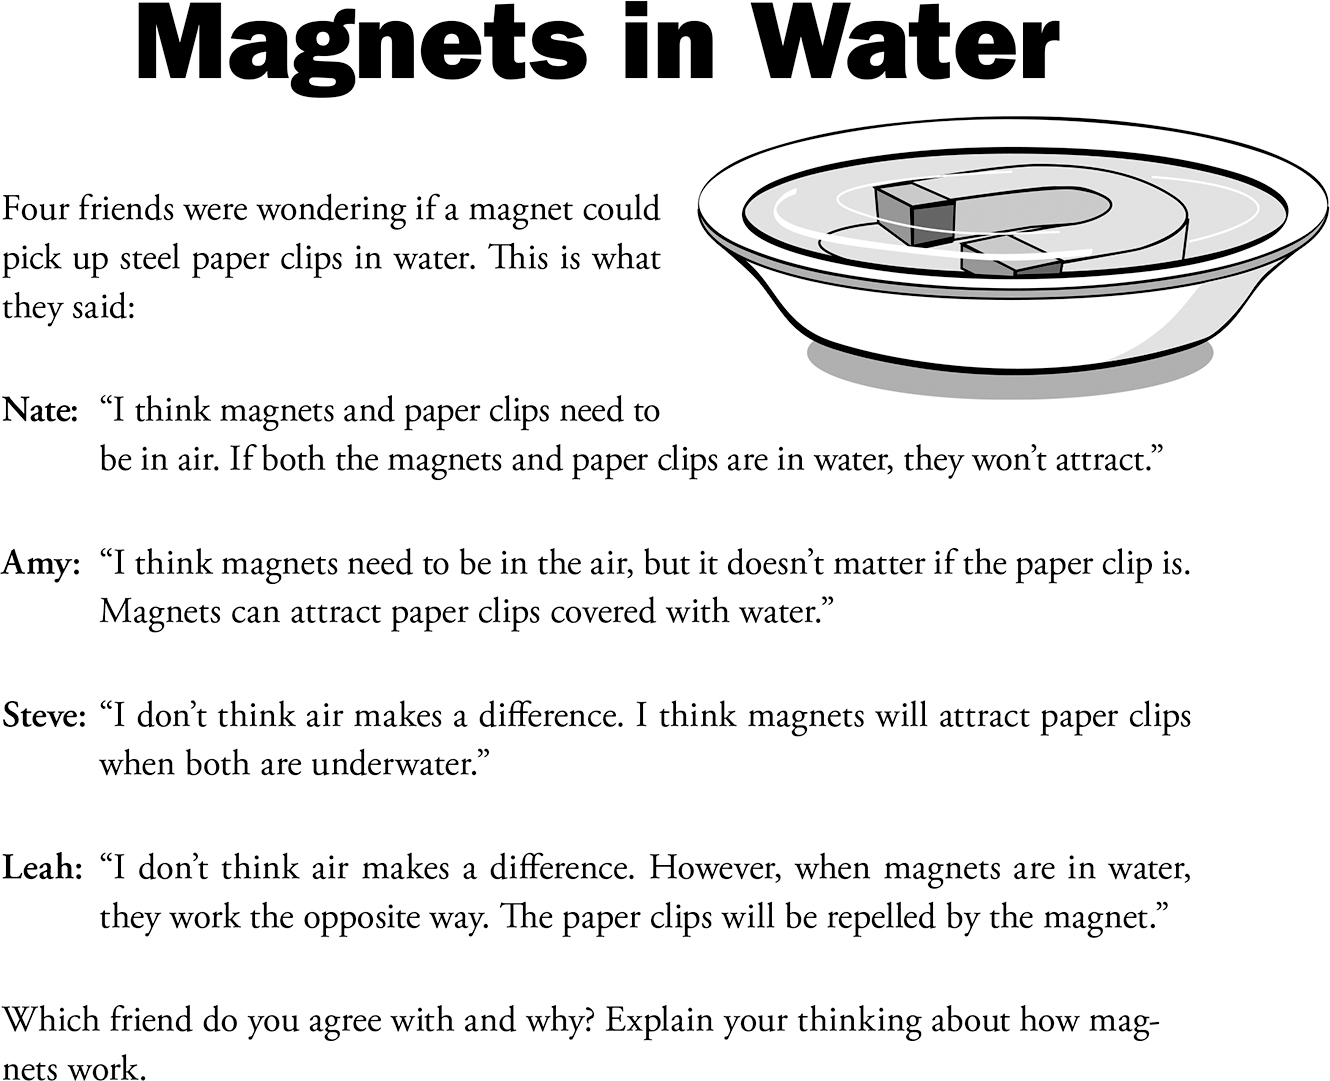 Magnets in Water probe.